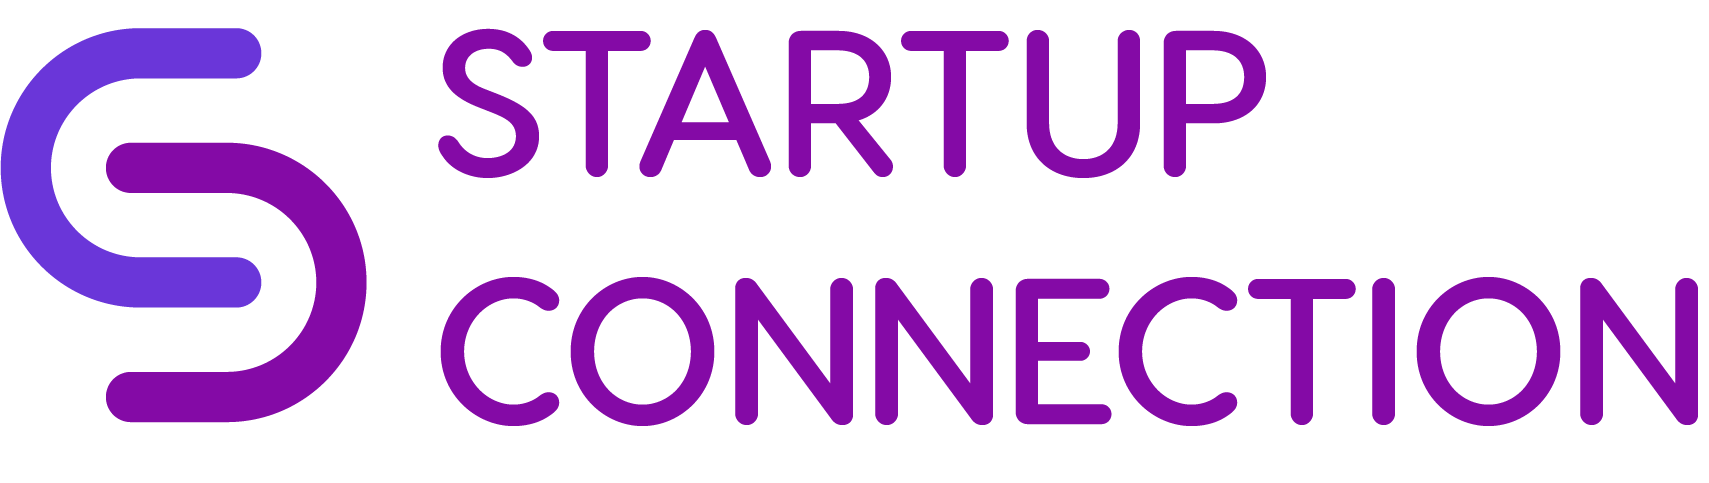 Startup Connection